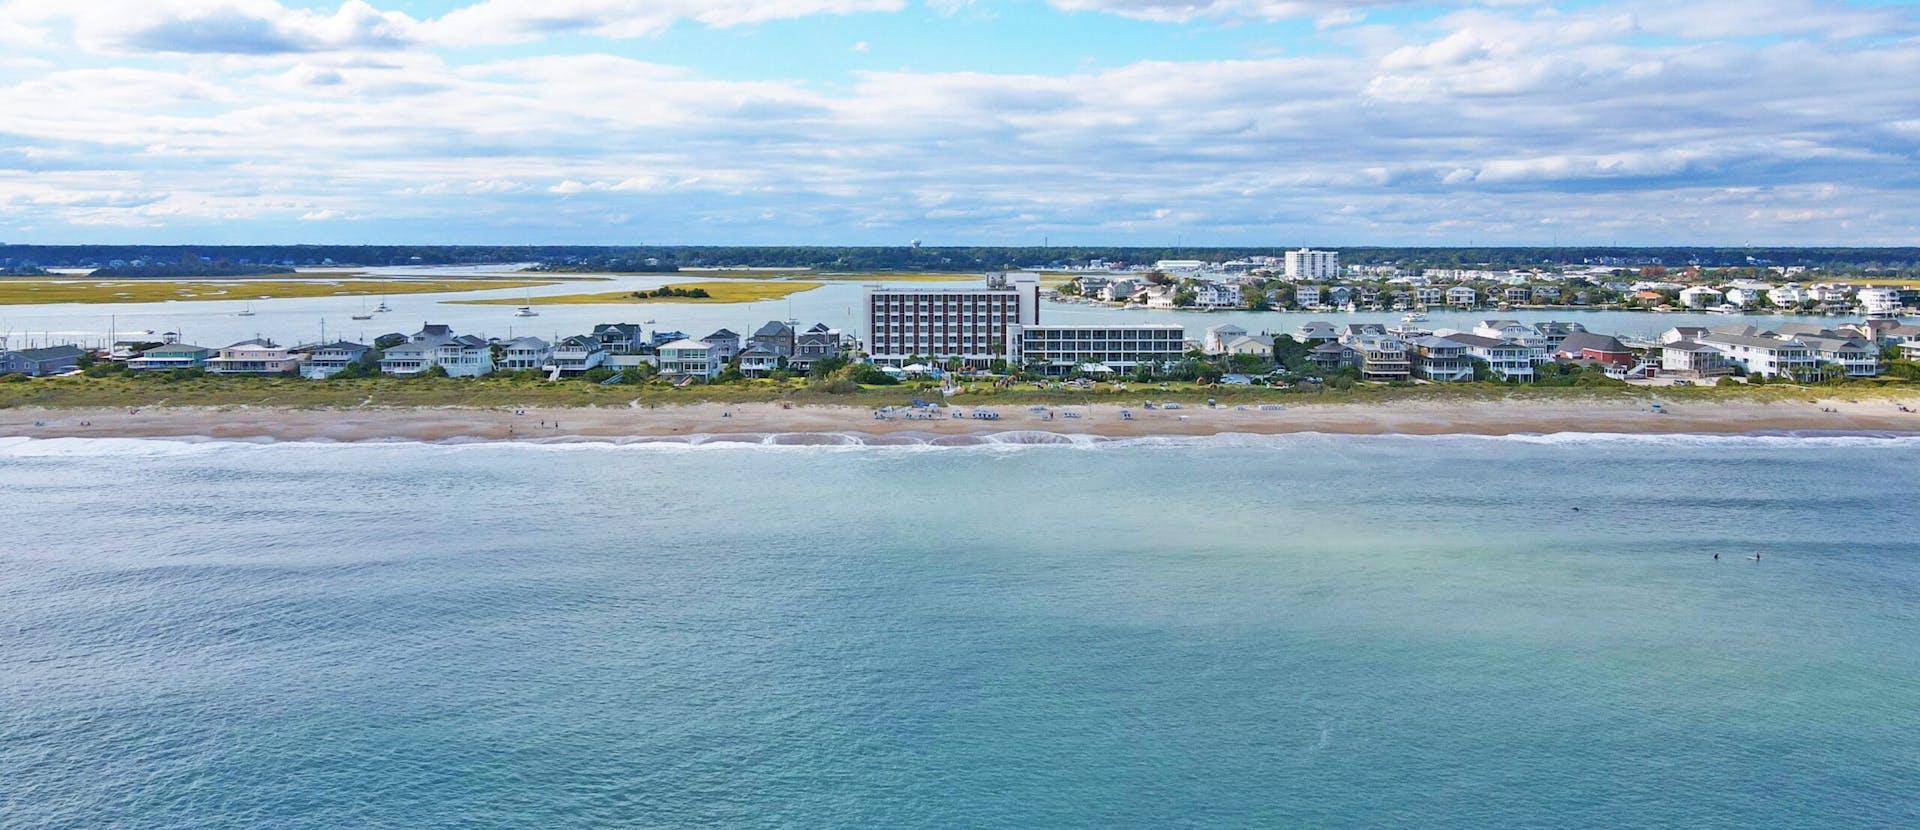 The Best Time to Visit Wrightsville Beach in 2023